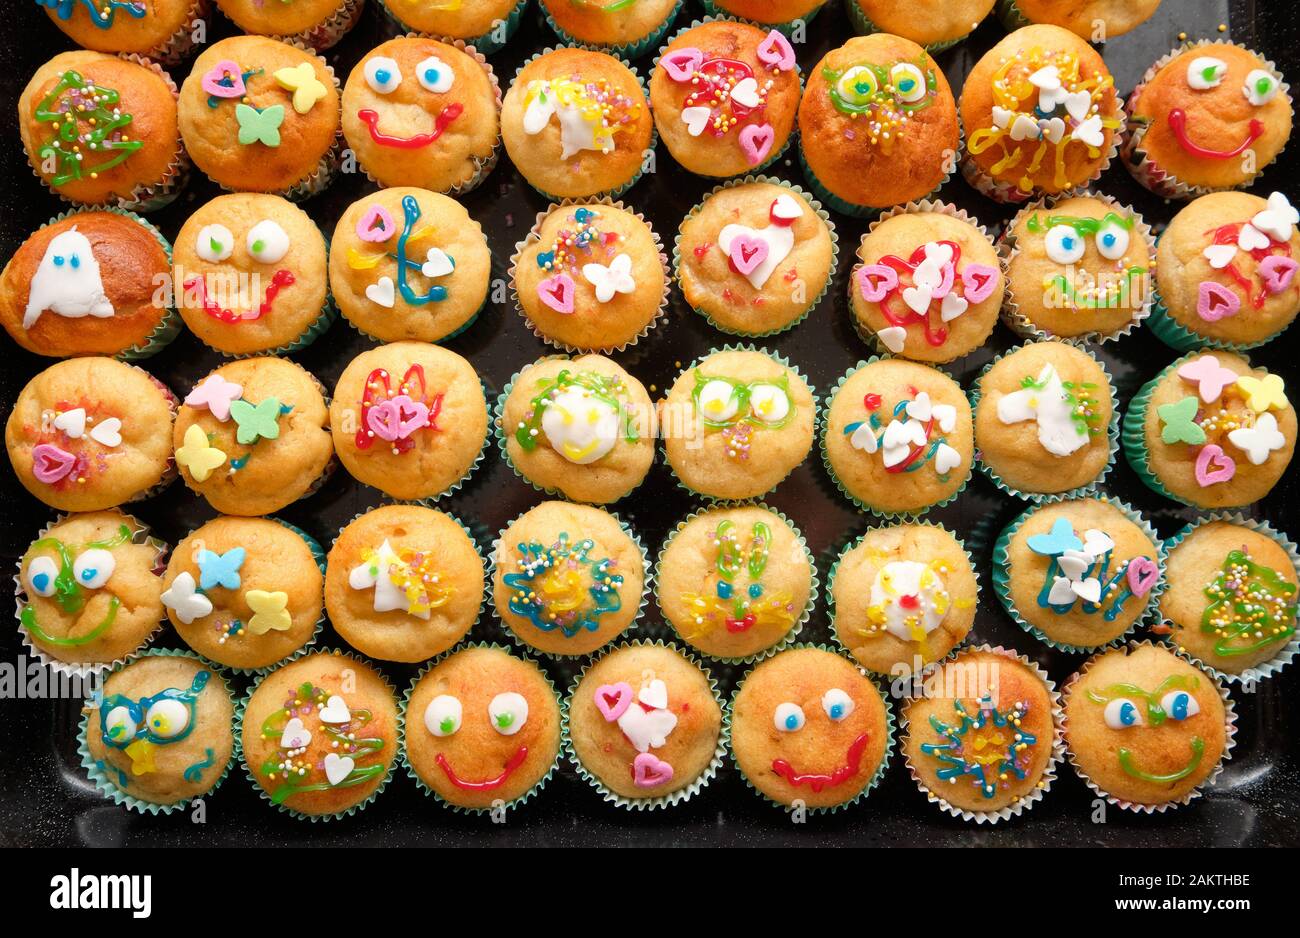 Close-up of a baking tray full of small homemade muffins with funny decoration ready for a children's birthday party Stock Photo